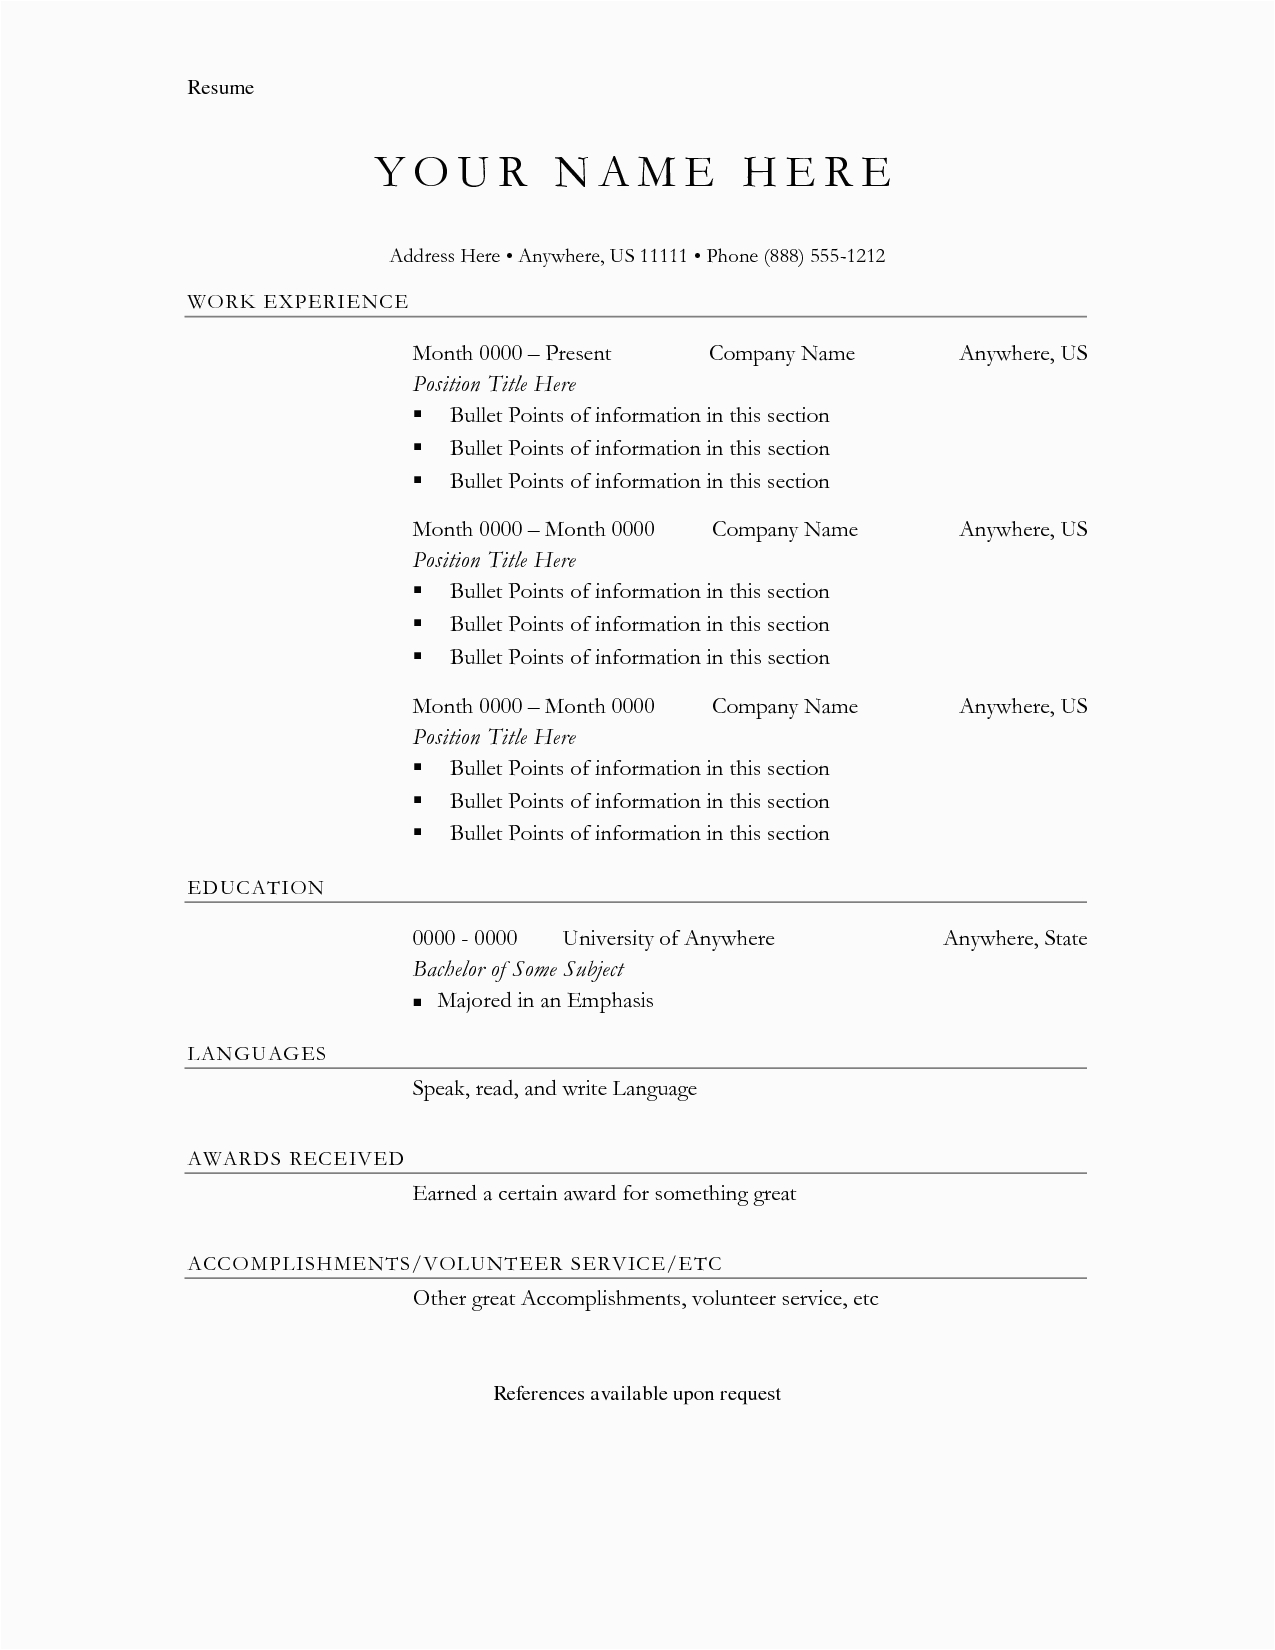 Free Resume Templates with Bullet Points Bullet Point Resume Template